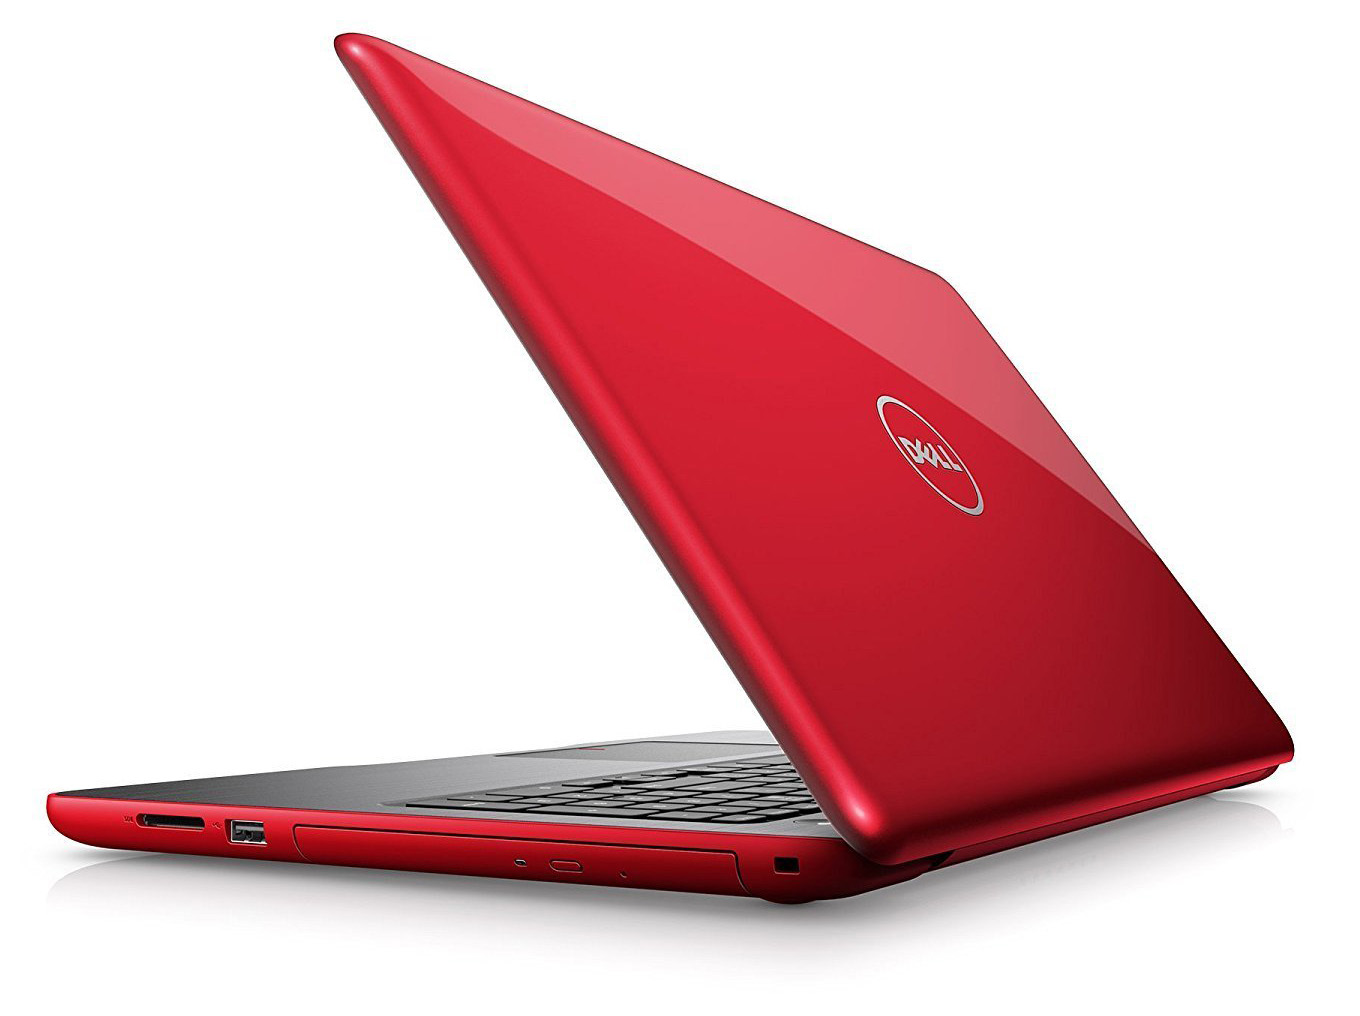 Dell Inspiron 15 5567 - Specs, Tests, and Prices | LaptopMedia Canada